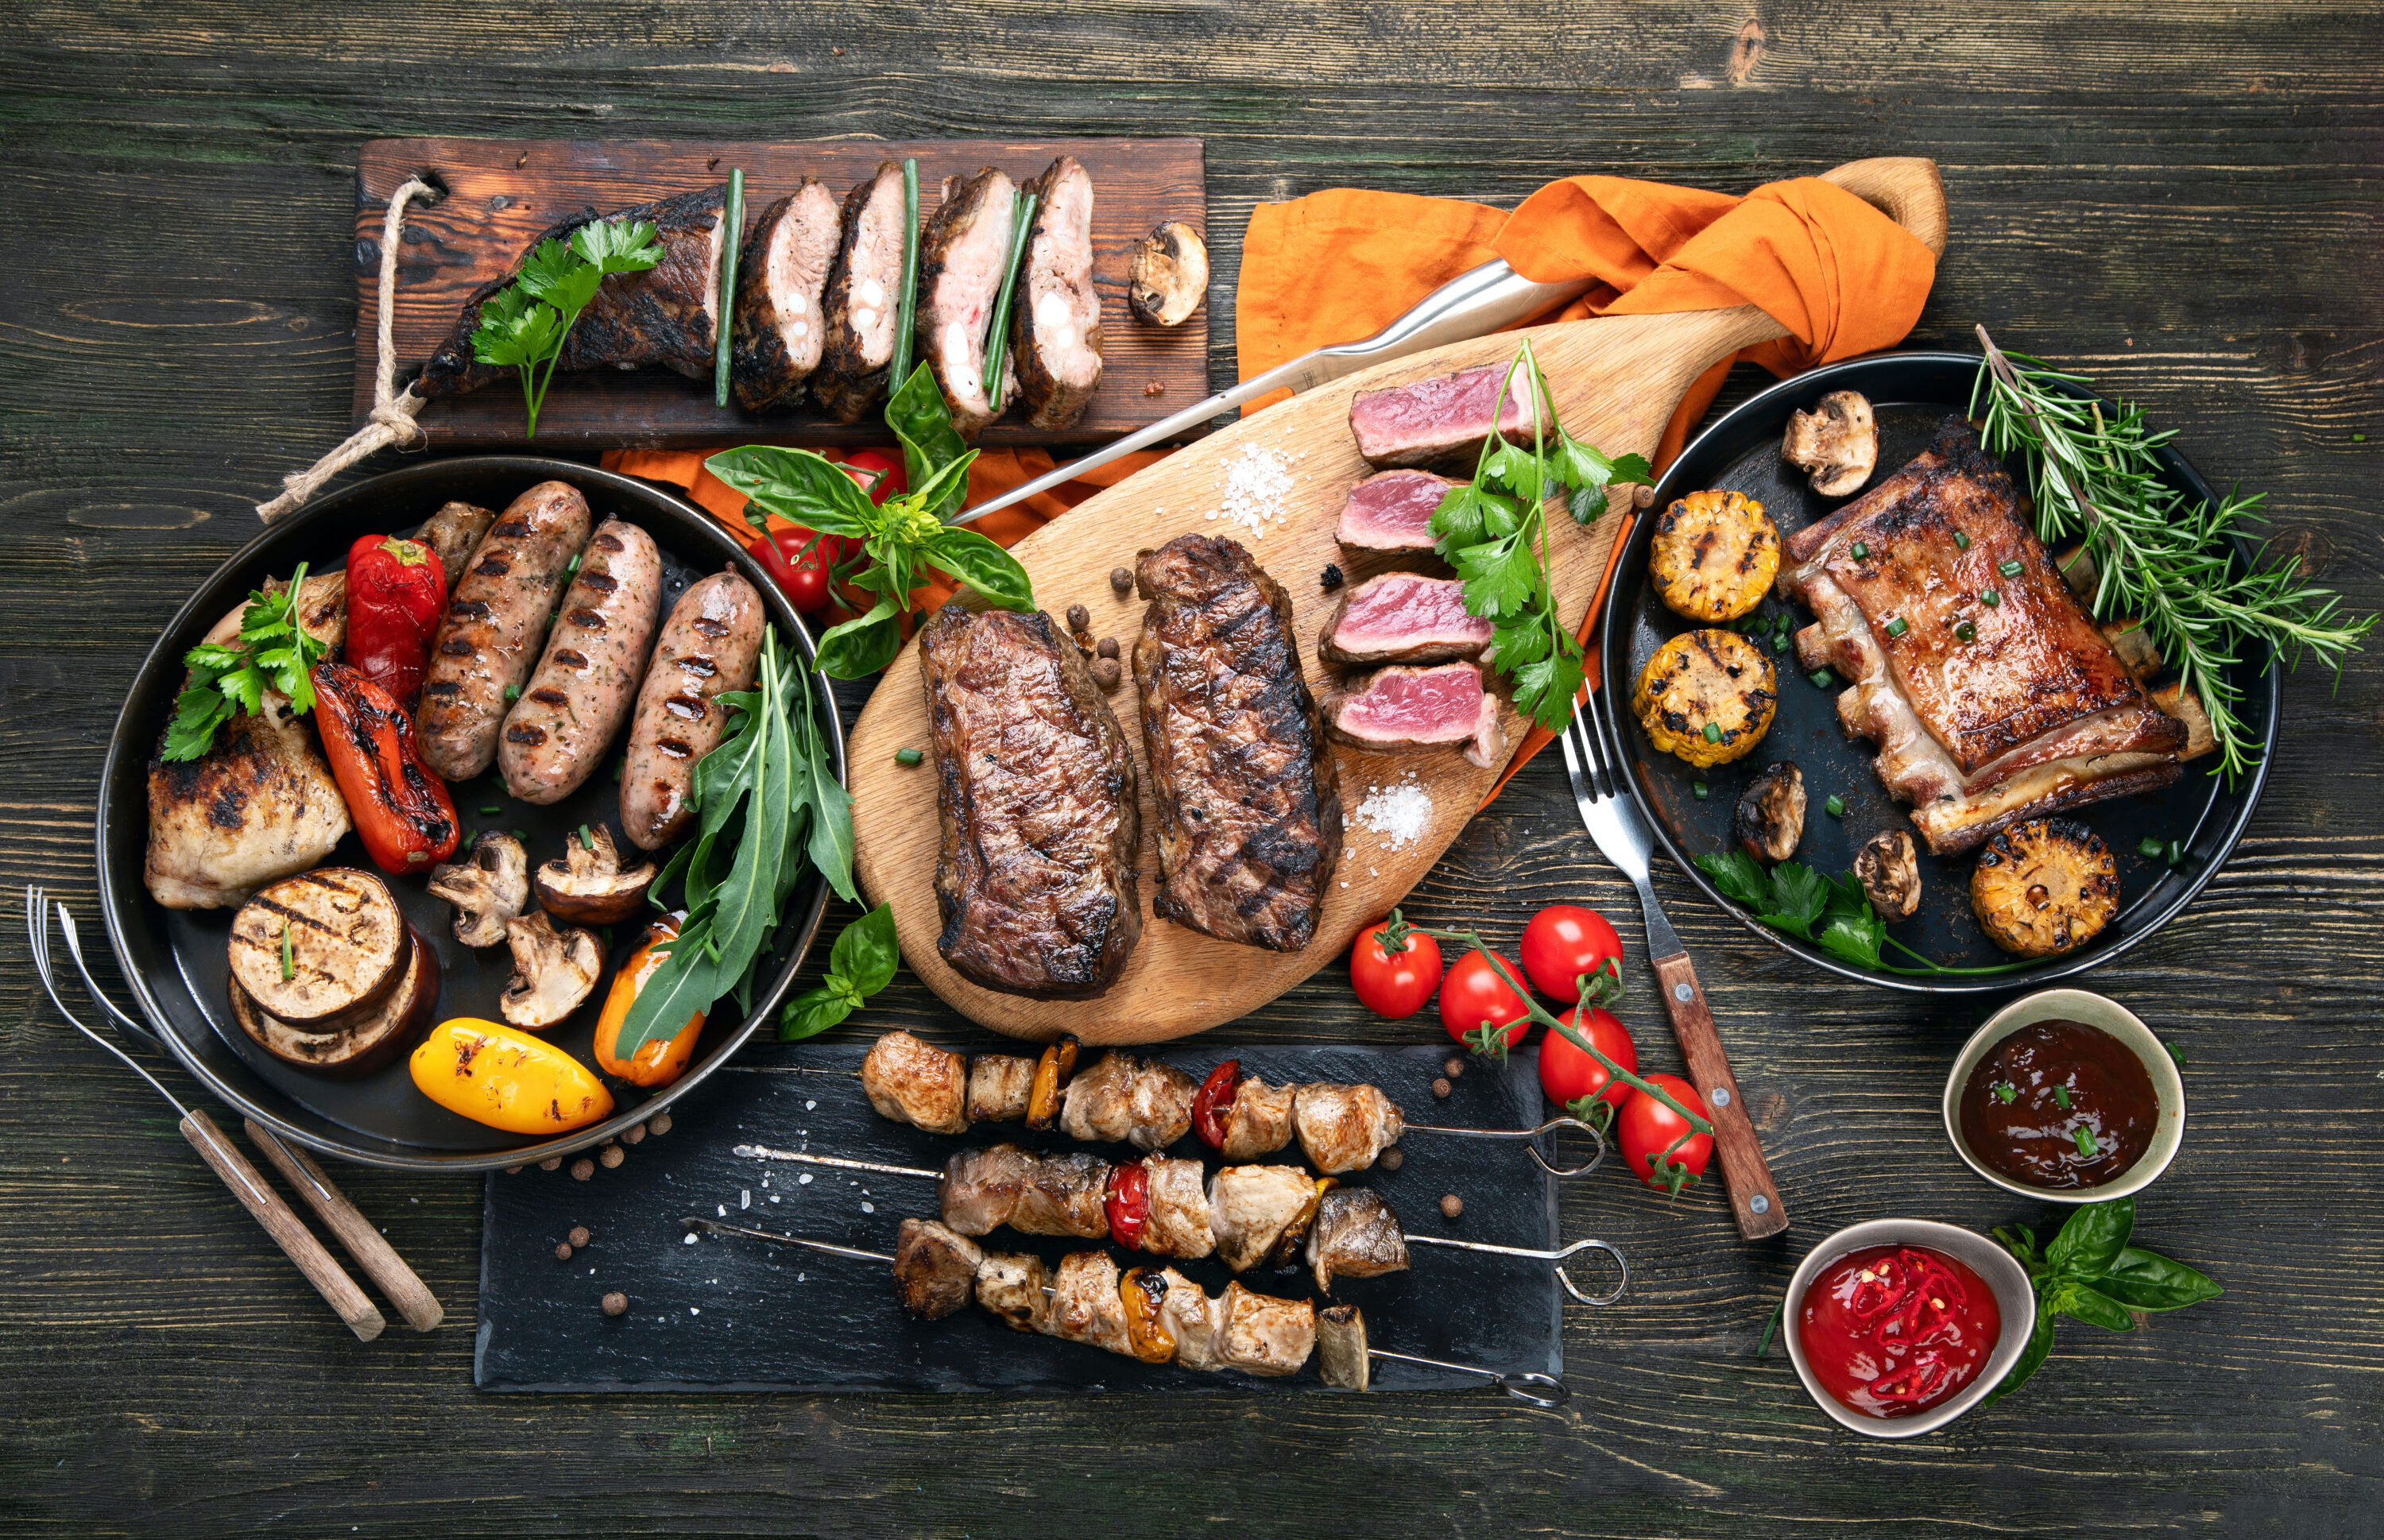 assorted-meat-with-vegetables-on-wooden-background-barbecue-with-sauces-in-dip-cups